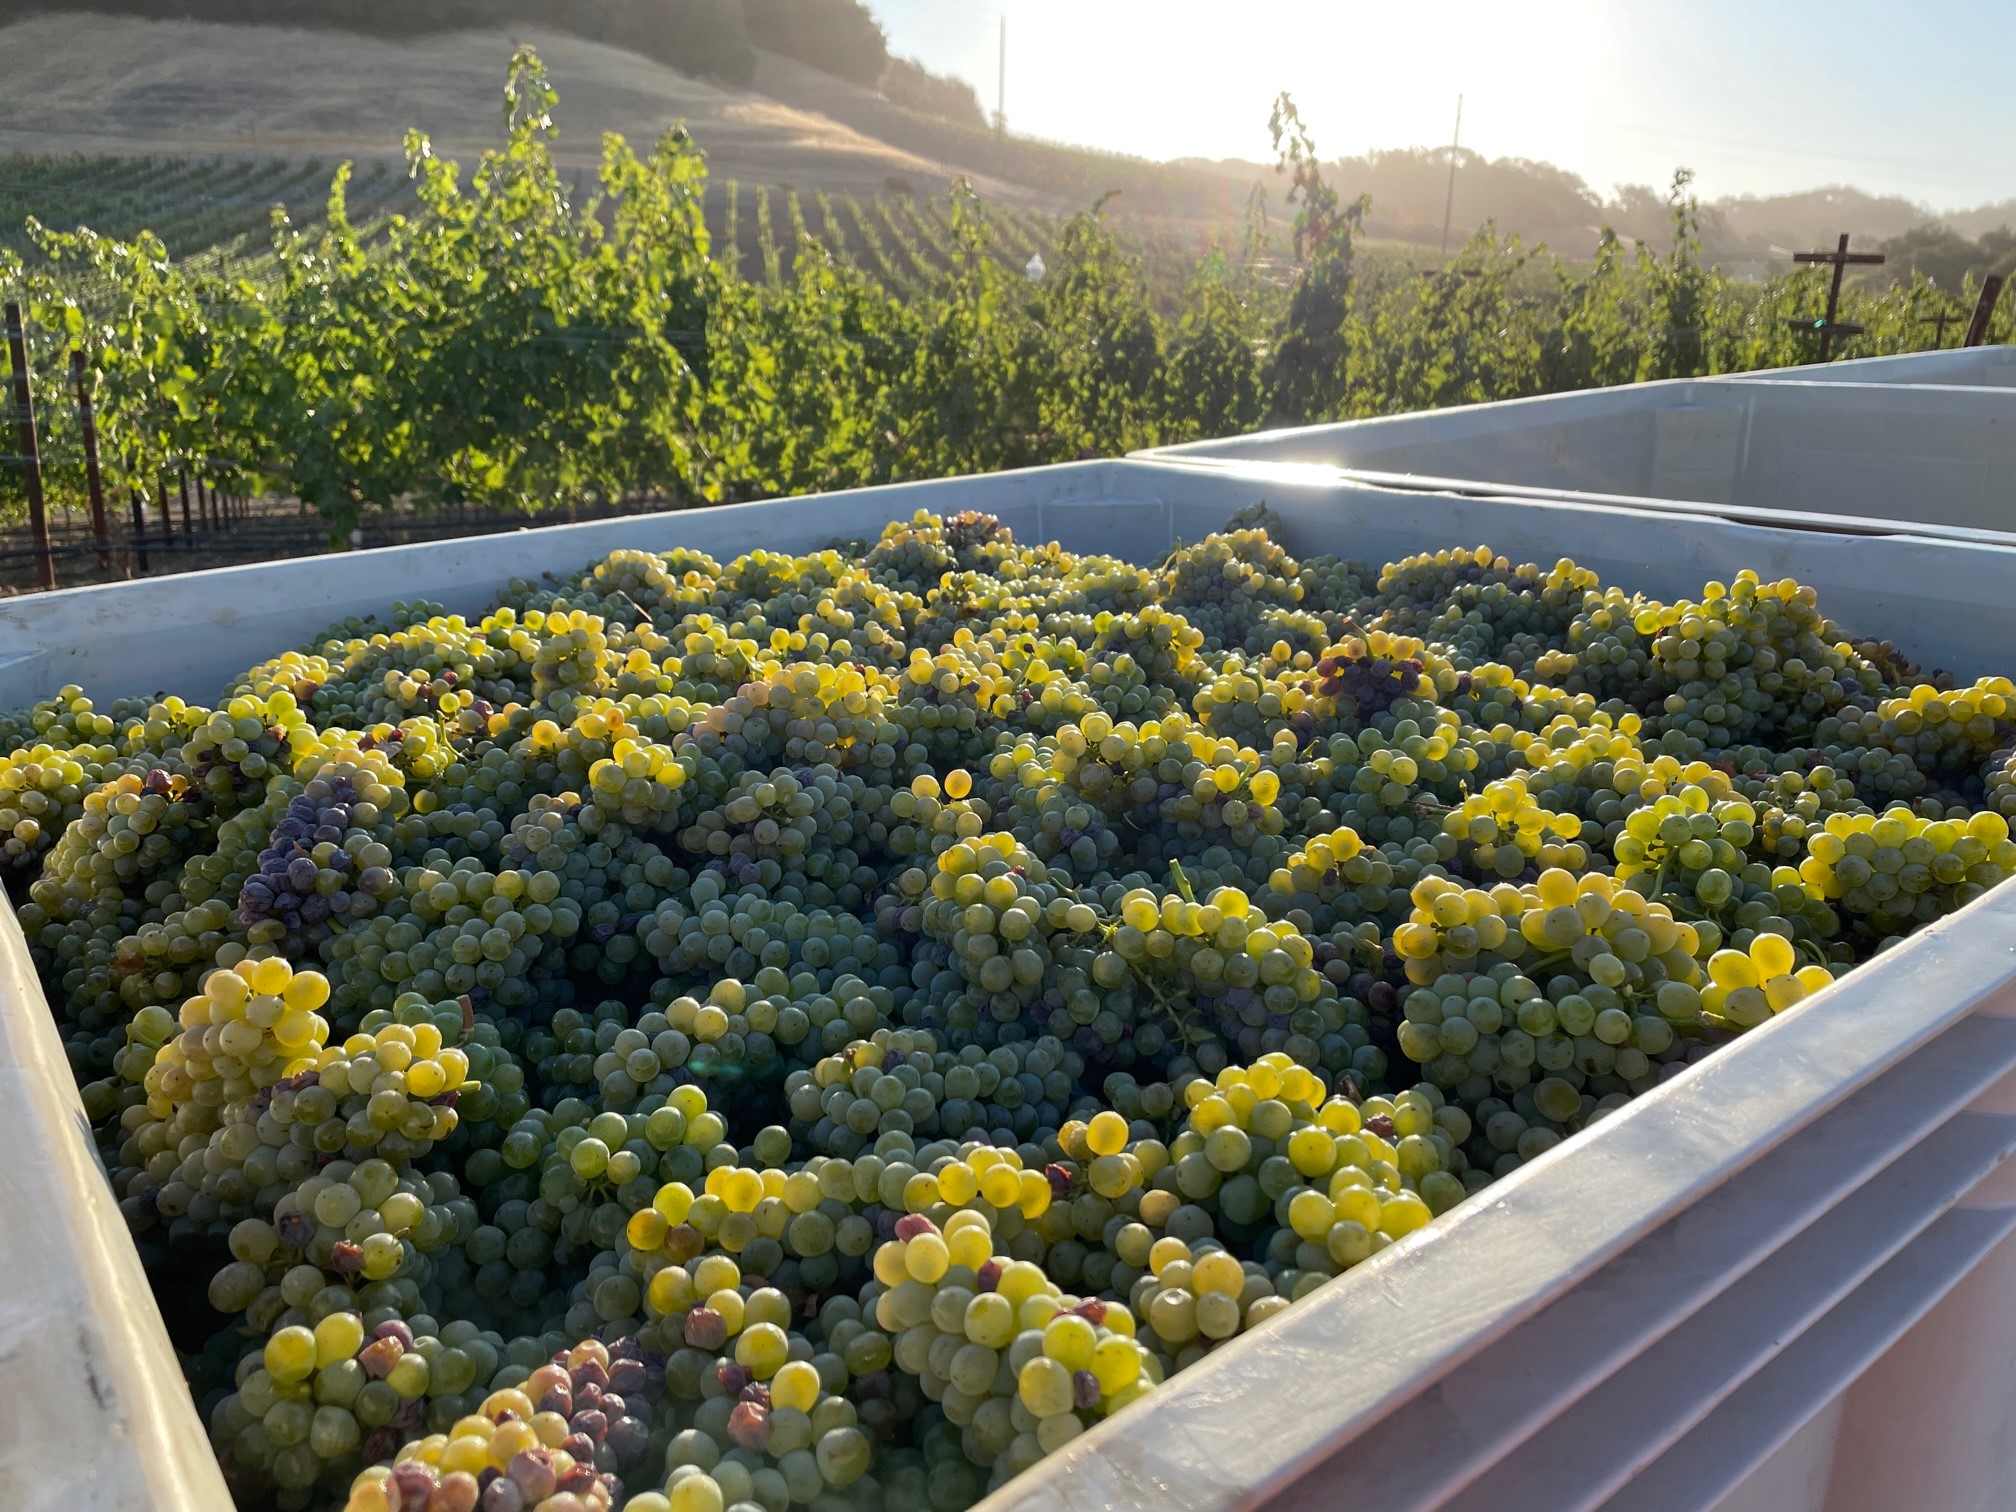 White wine grapes in a harvest container